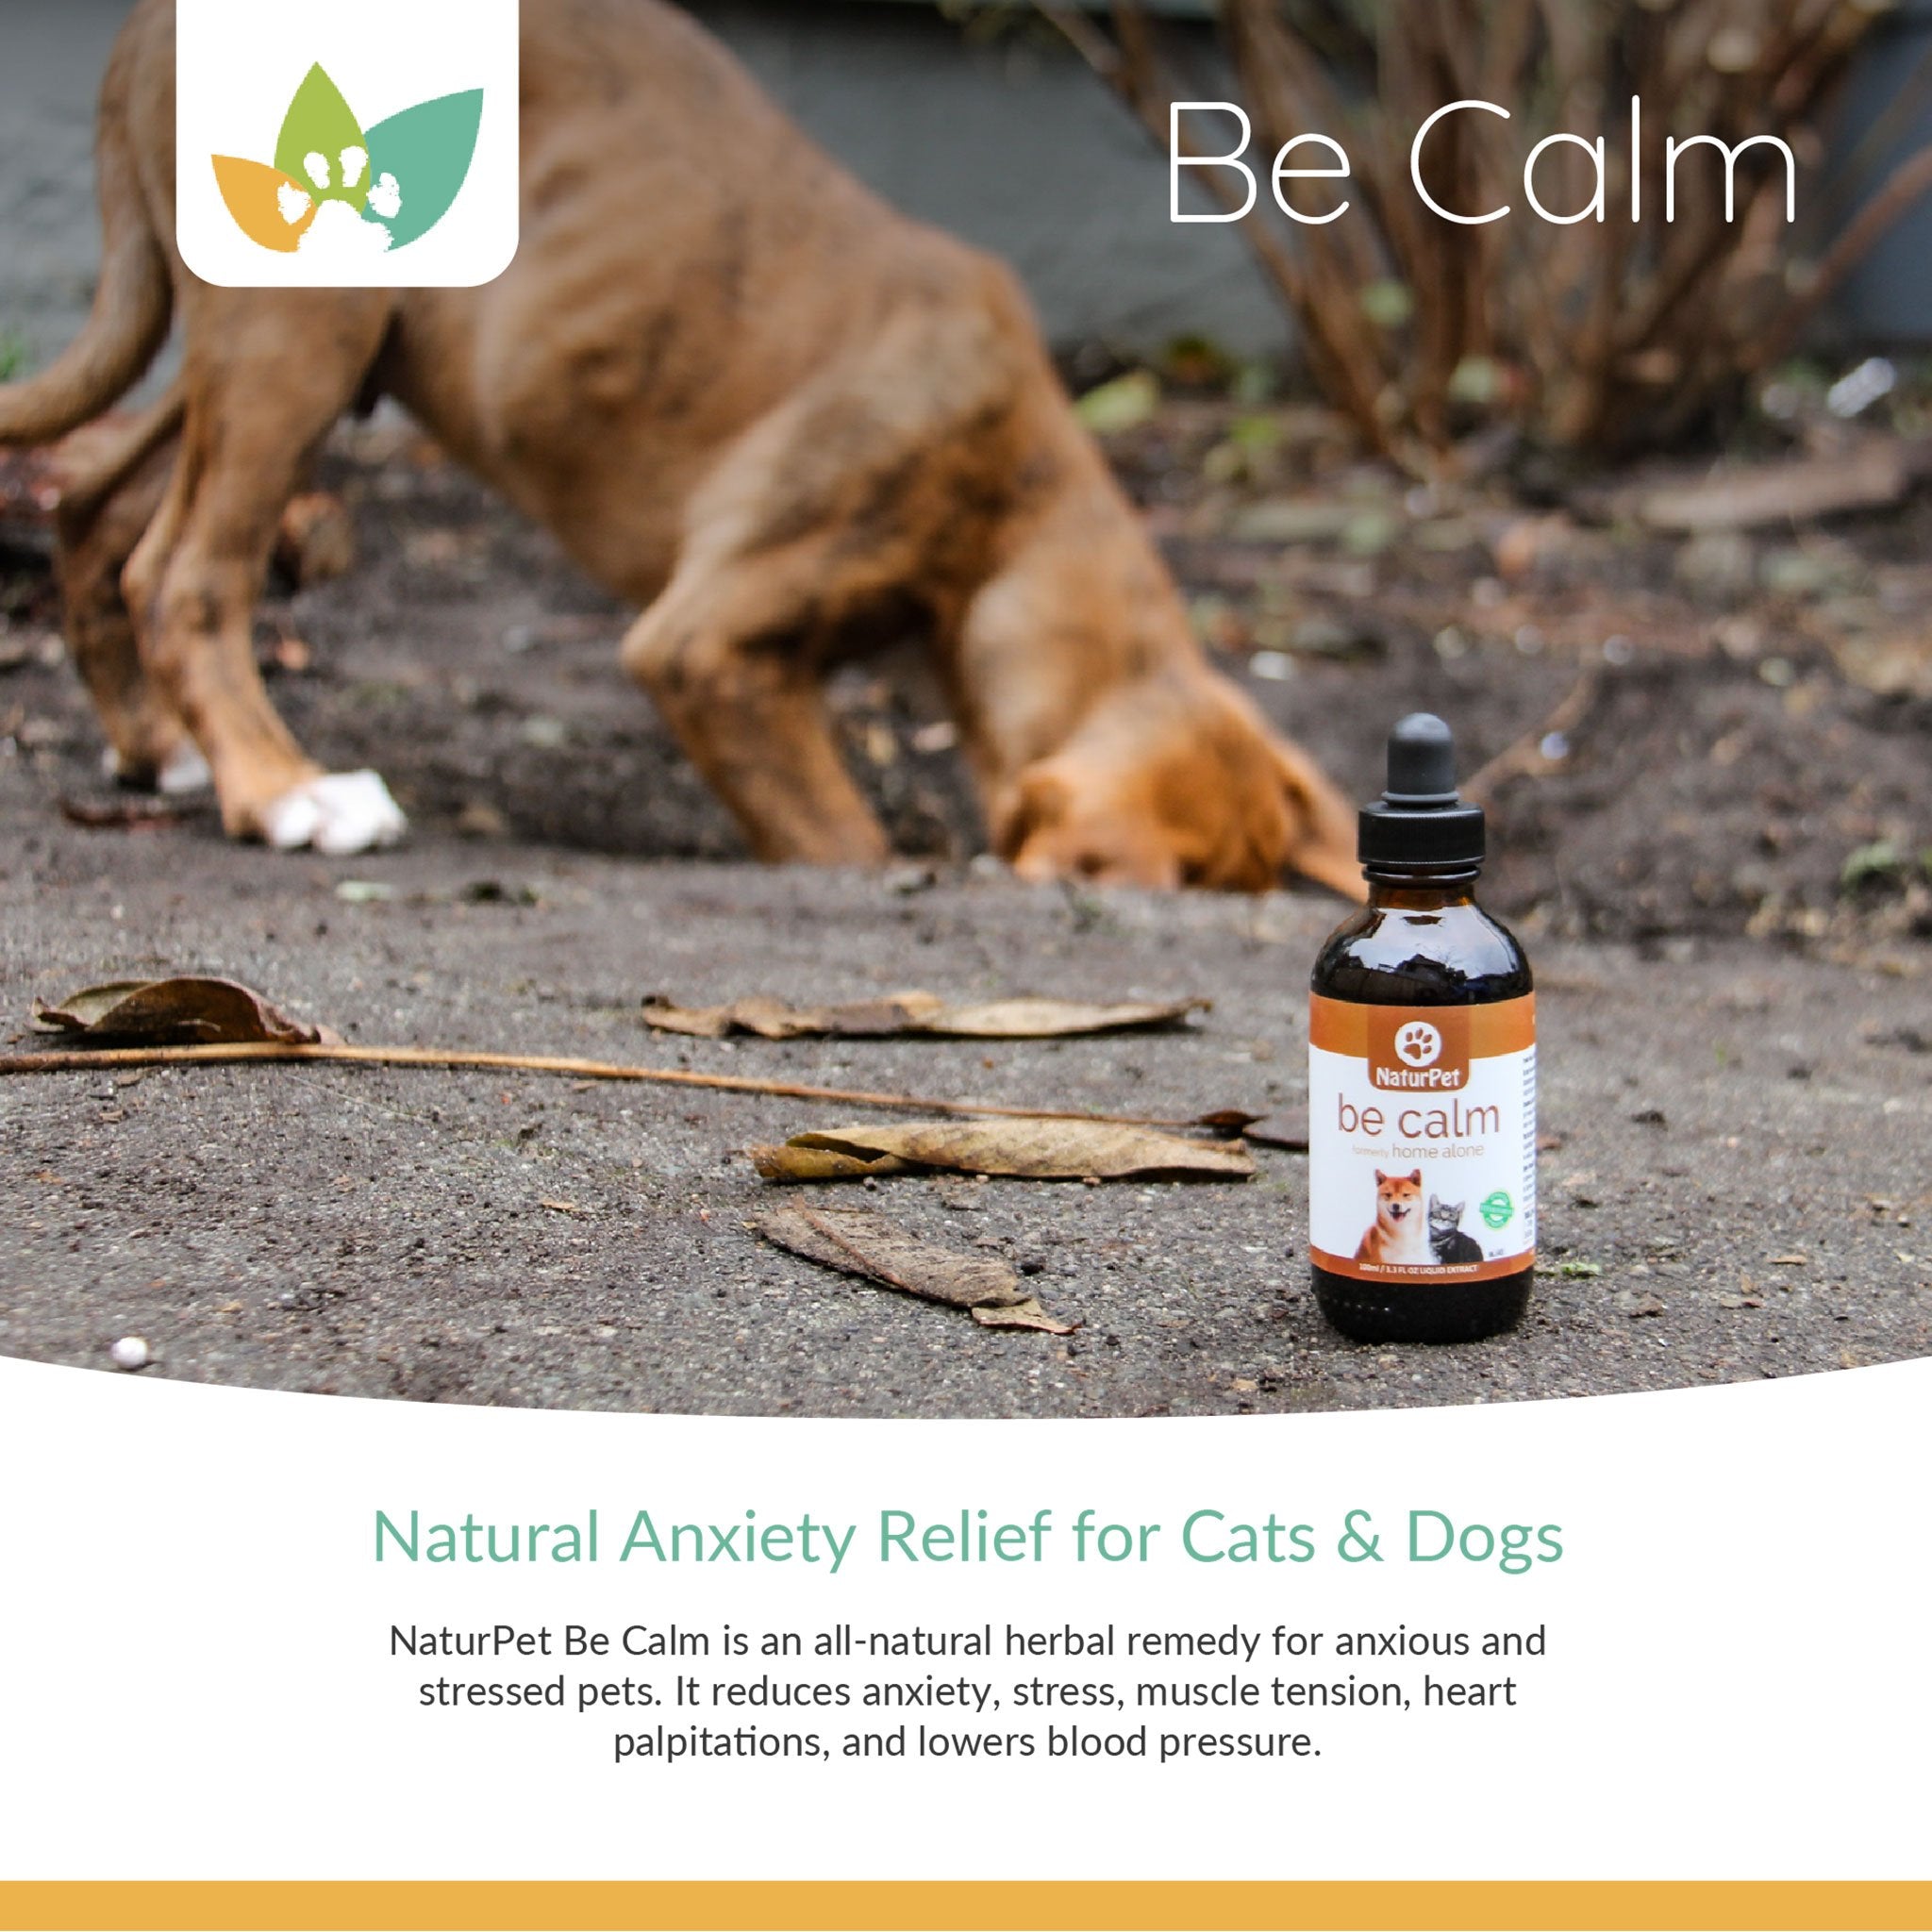 NaturPet Be Calm Product Info